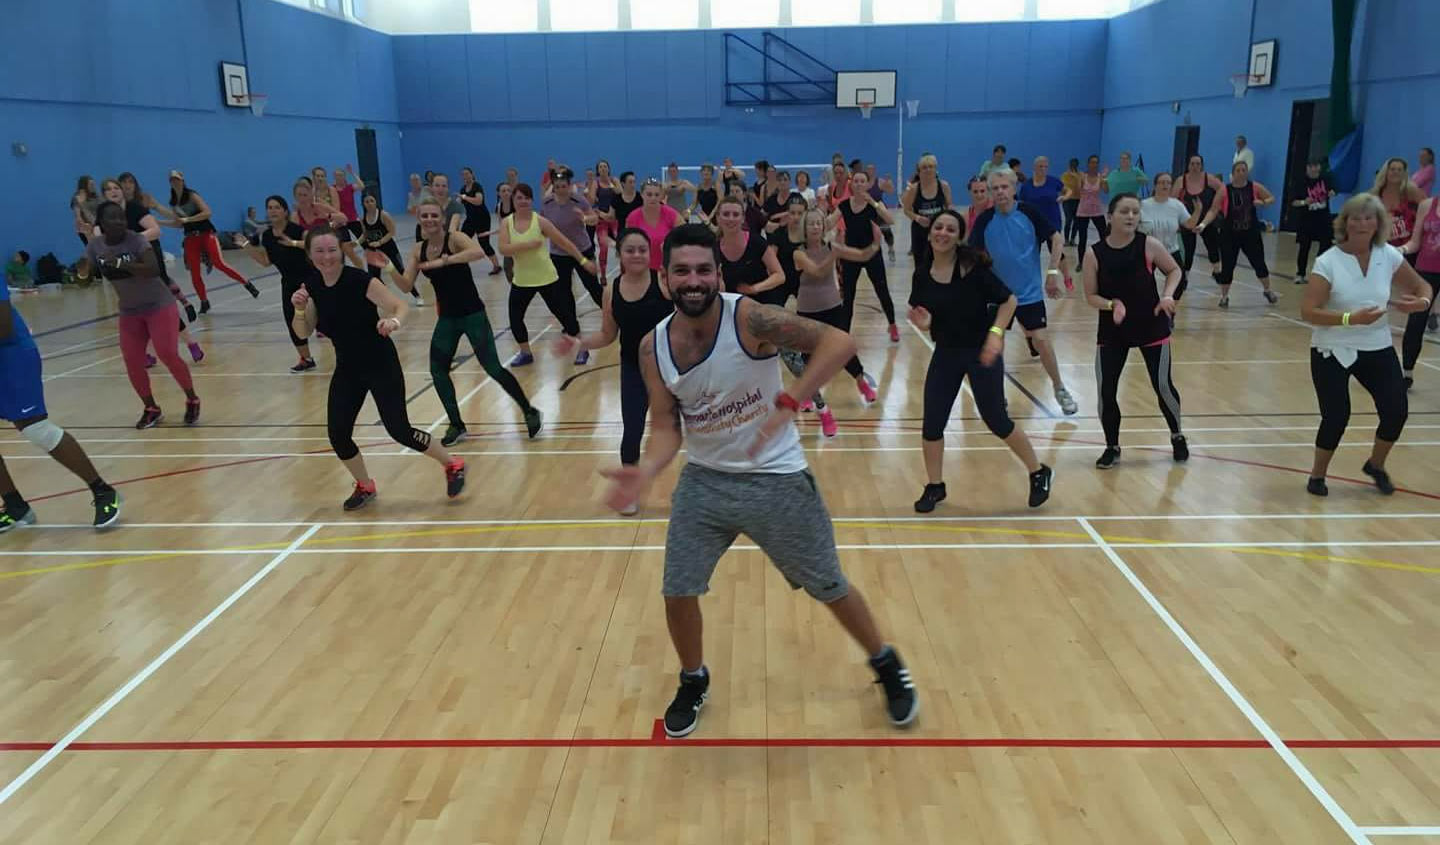 Freemasons, Zumba Enthusiasts and K9 Patrol raise more than £7,000 for Harrogate District Hospital’s Nidderdale Ward